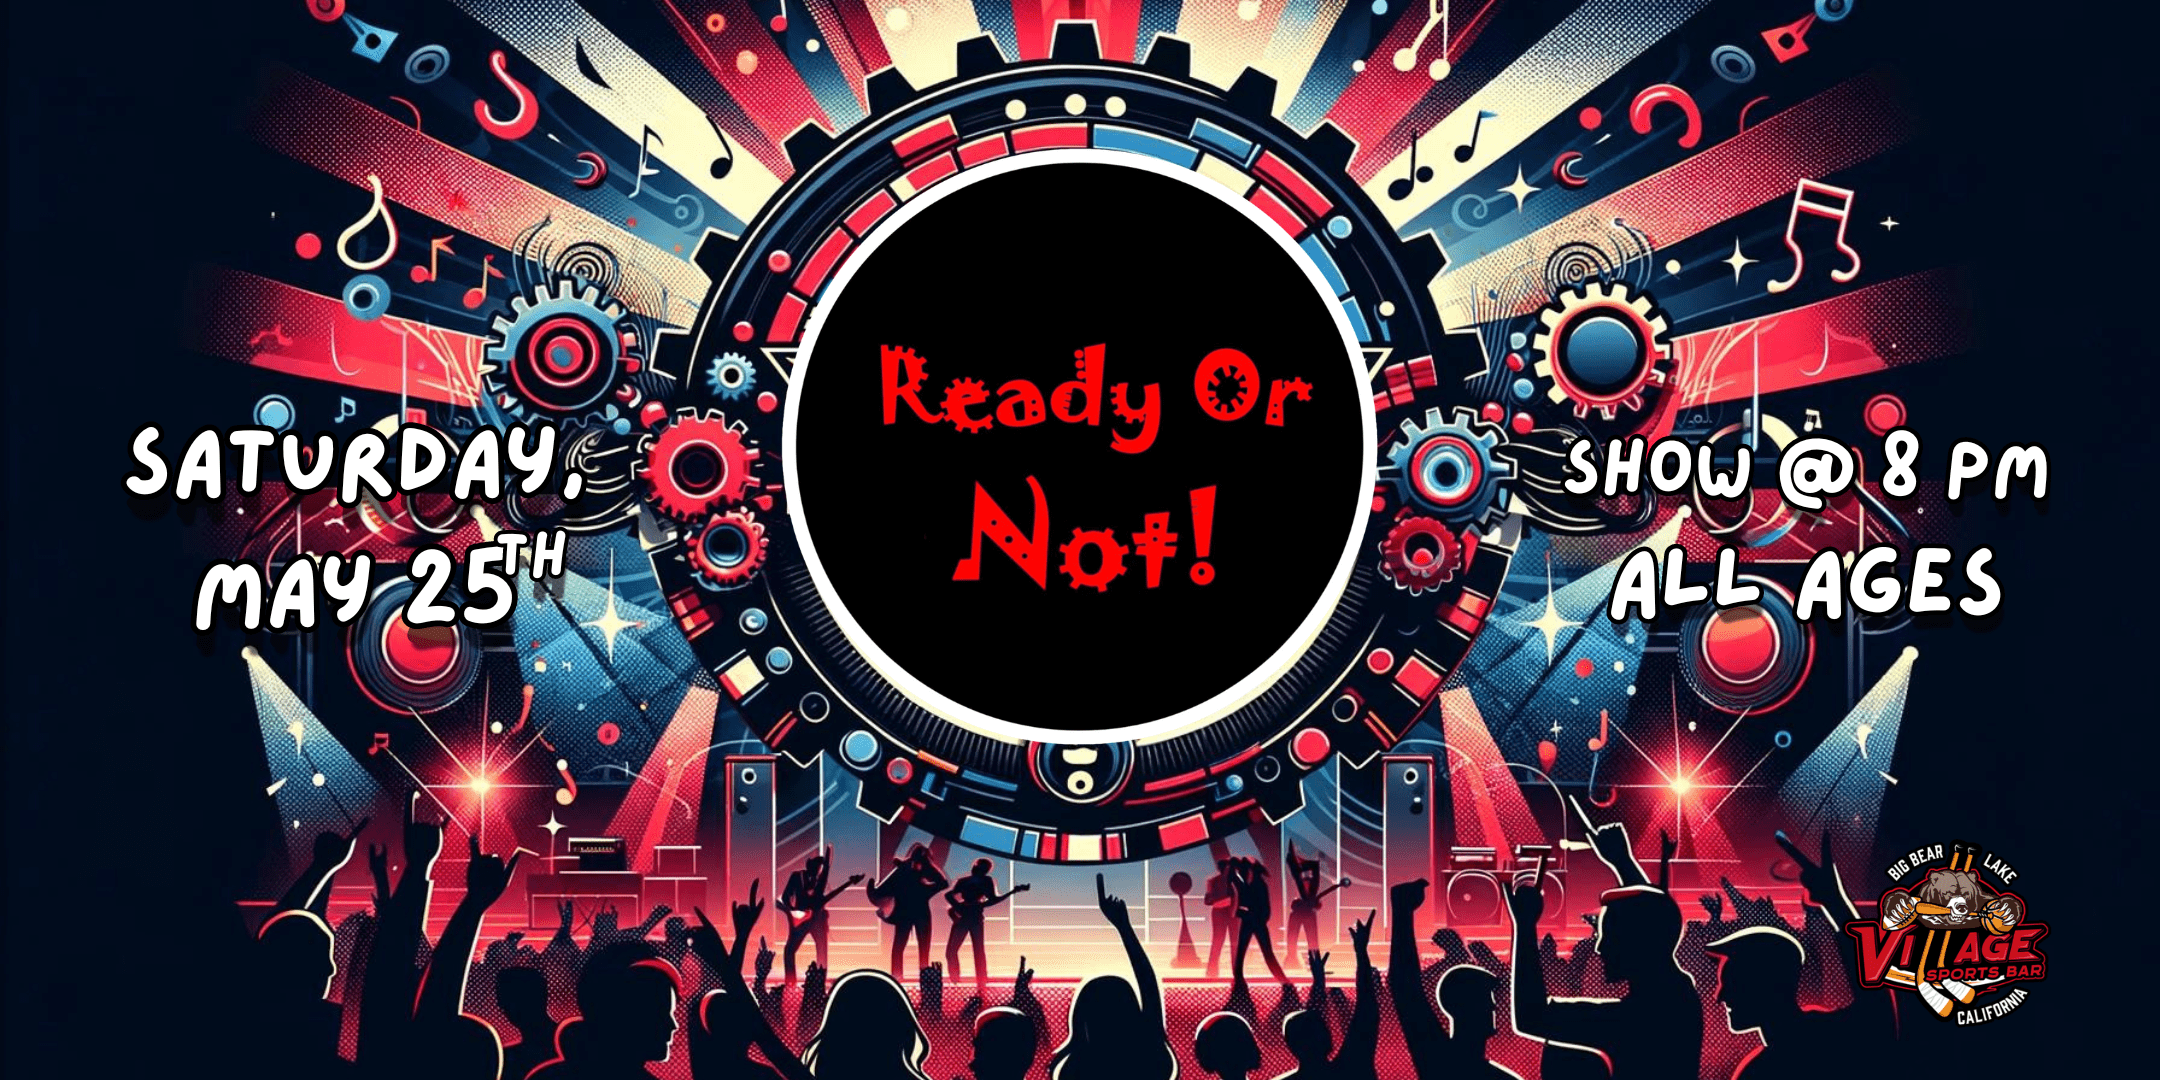 Village Sports Bar Presents: Ready Or Not